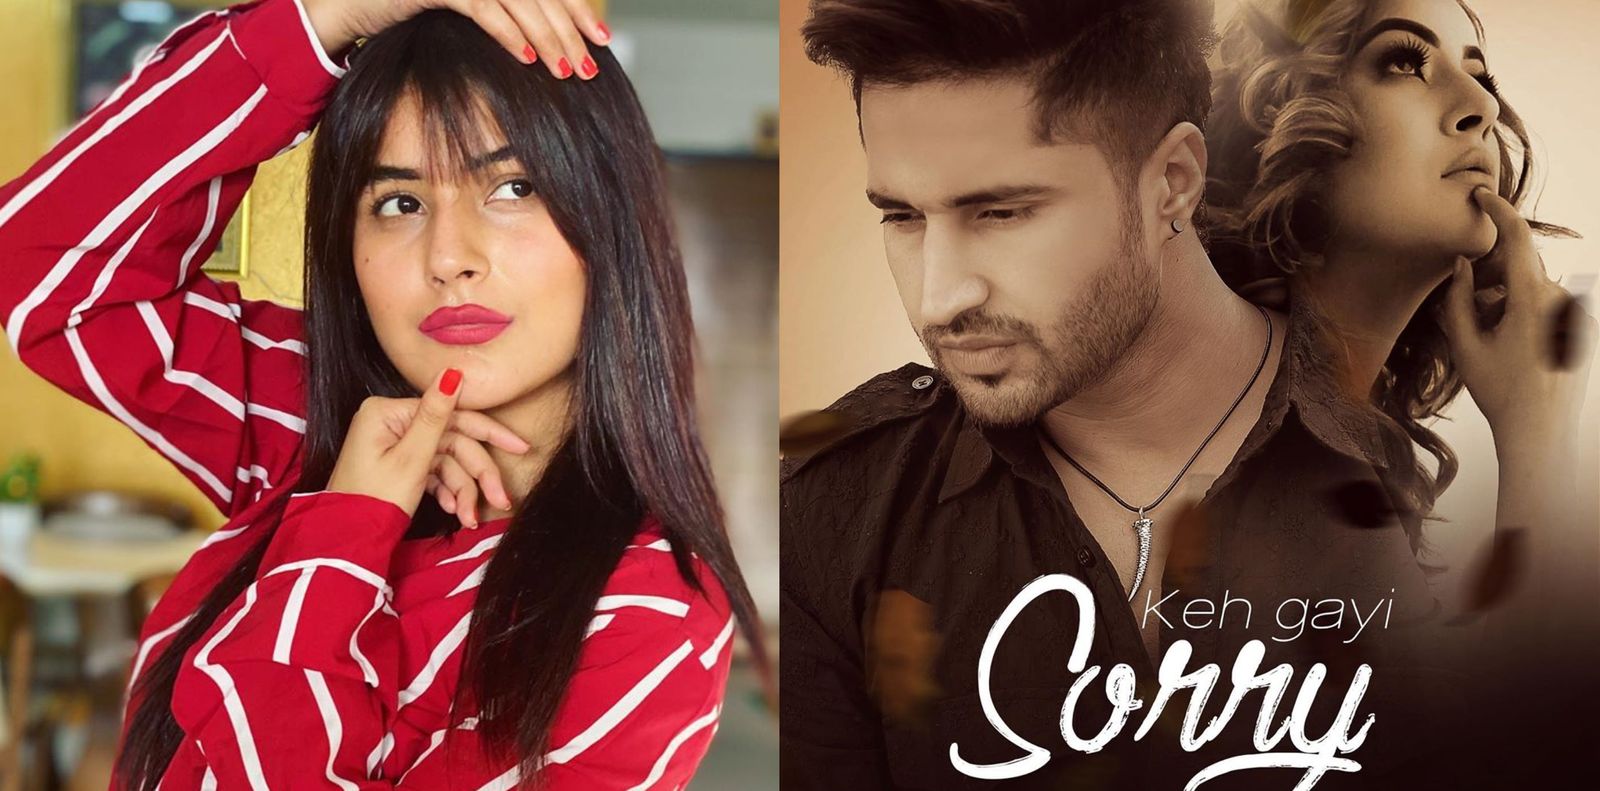 Shehnaaz Gill Gets Candid About Jassie Gill And Keh Gayi Sorry; Opens Up About Making Funny Tik Tok Videos